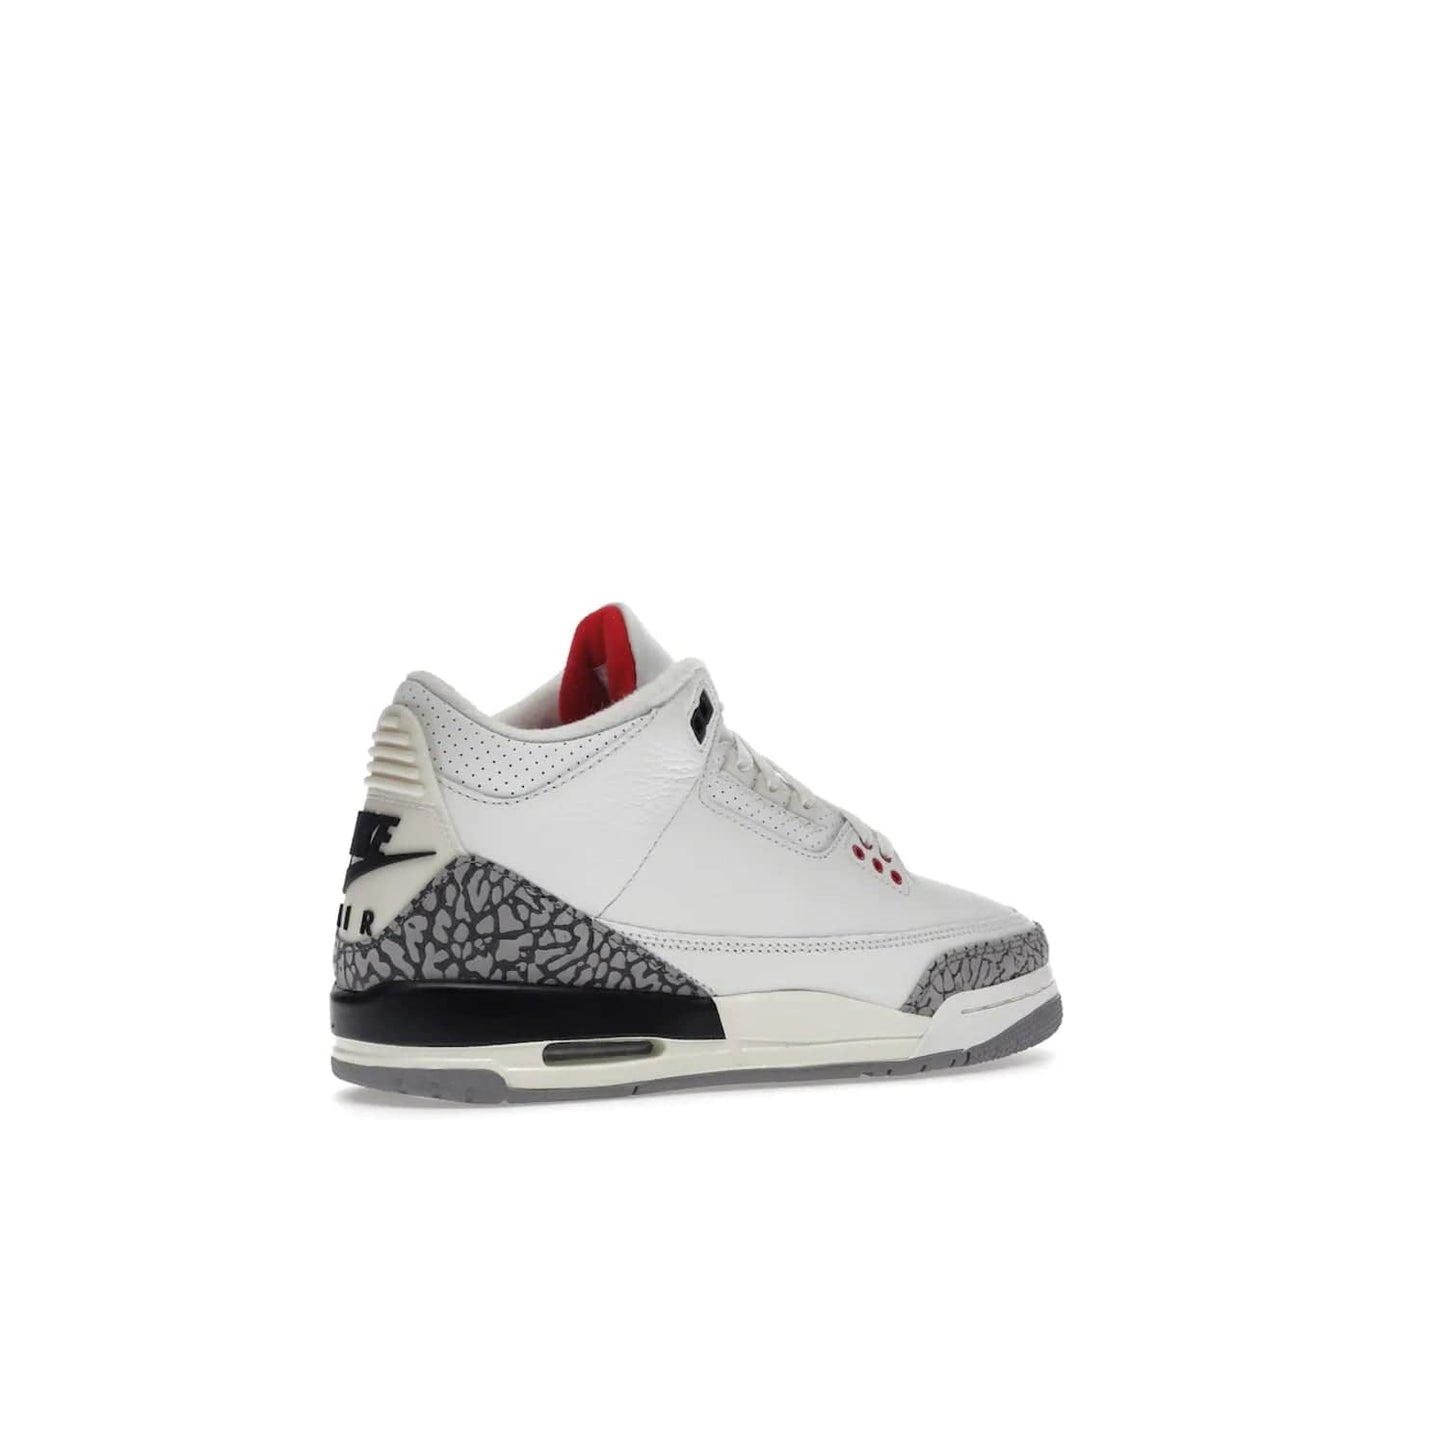 Jordan 3 Retro White Cement Reimagined (GS) - Image 34 - Only at www.BallersClubKickz.com - Grab the perfect blend of modern design and classic style with the Jordan 3 Retro White Cement Reimagined (GS). Features Summit White, Fire Red, Black, and Cement Grey colorway, iconic Jordan logo embroidered on the tongue, and “Nike Air” branding. Limited availability, get your pair before March 11th 2023.